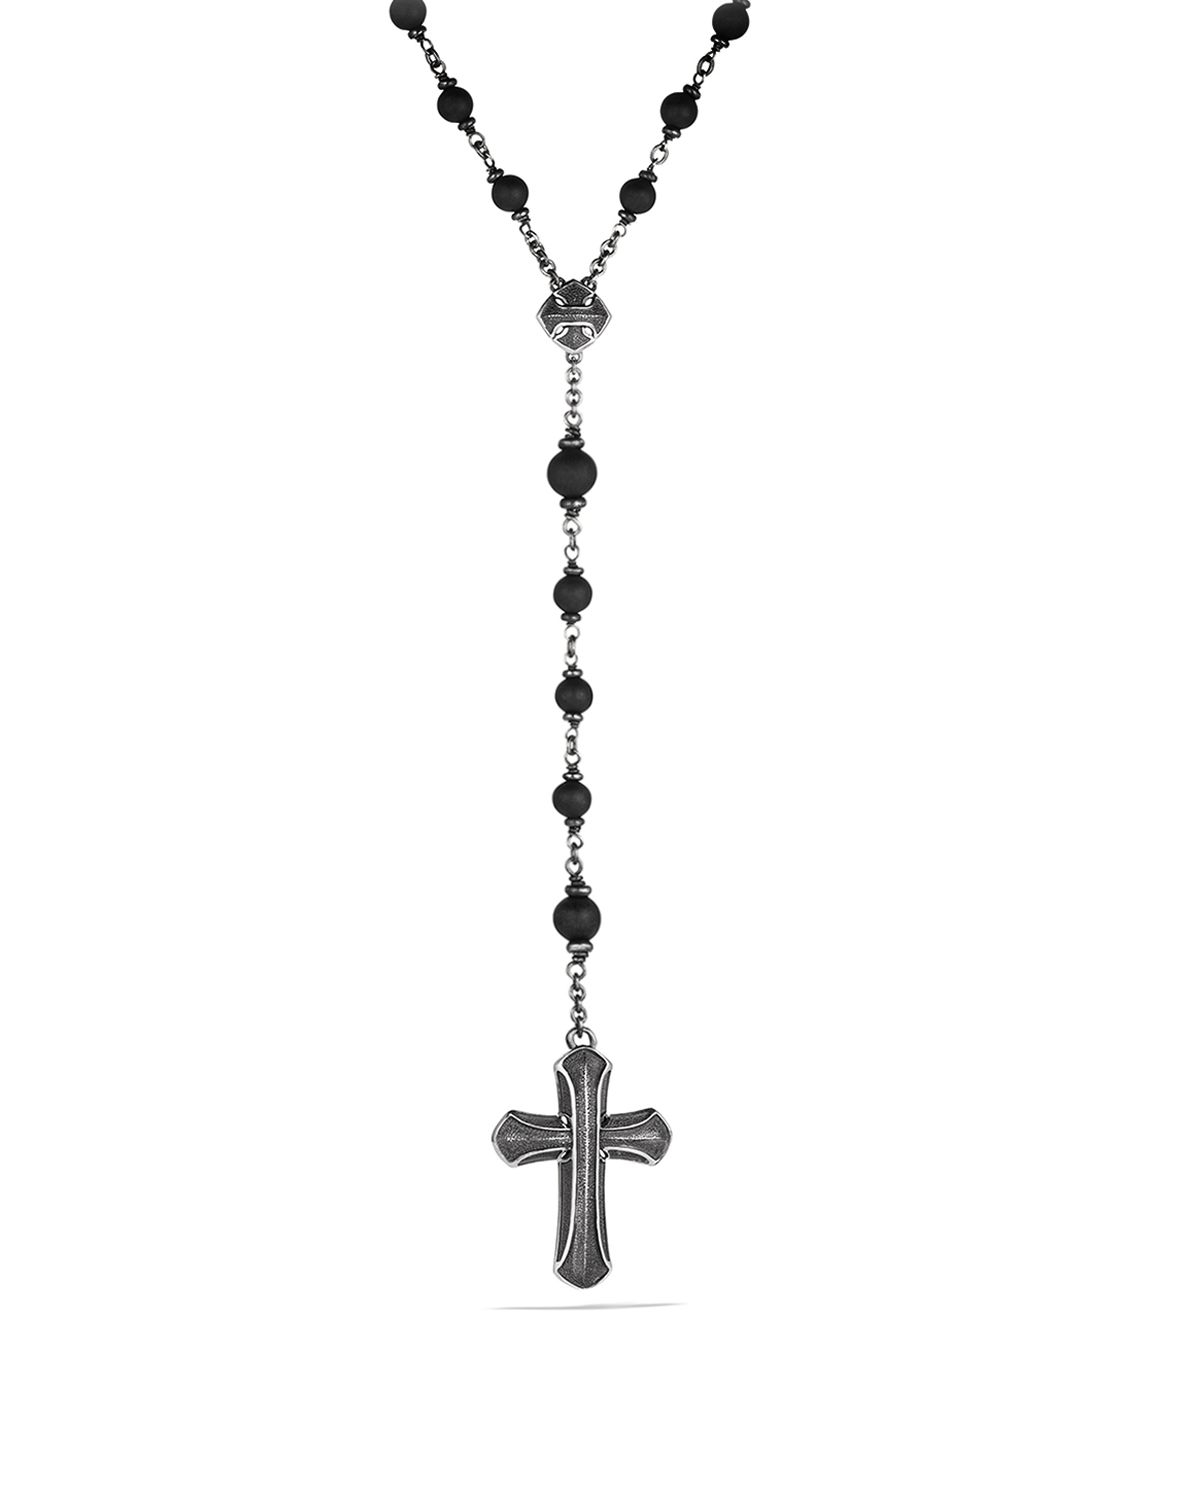 Lyst - David Yurman Armory Rosary Necklace with Black Onyx in Black for Men